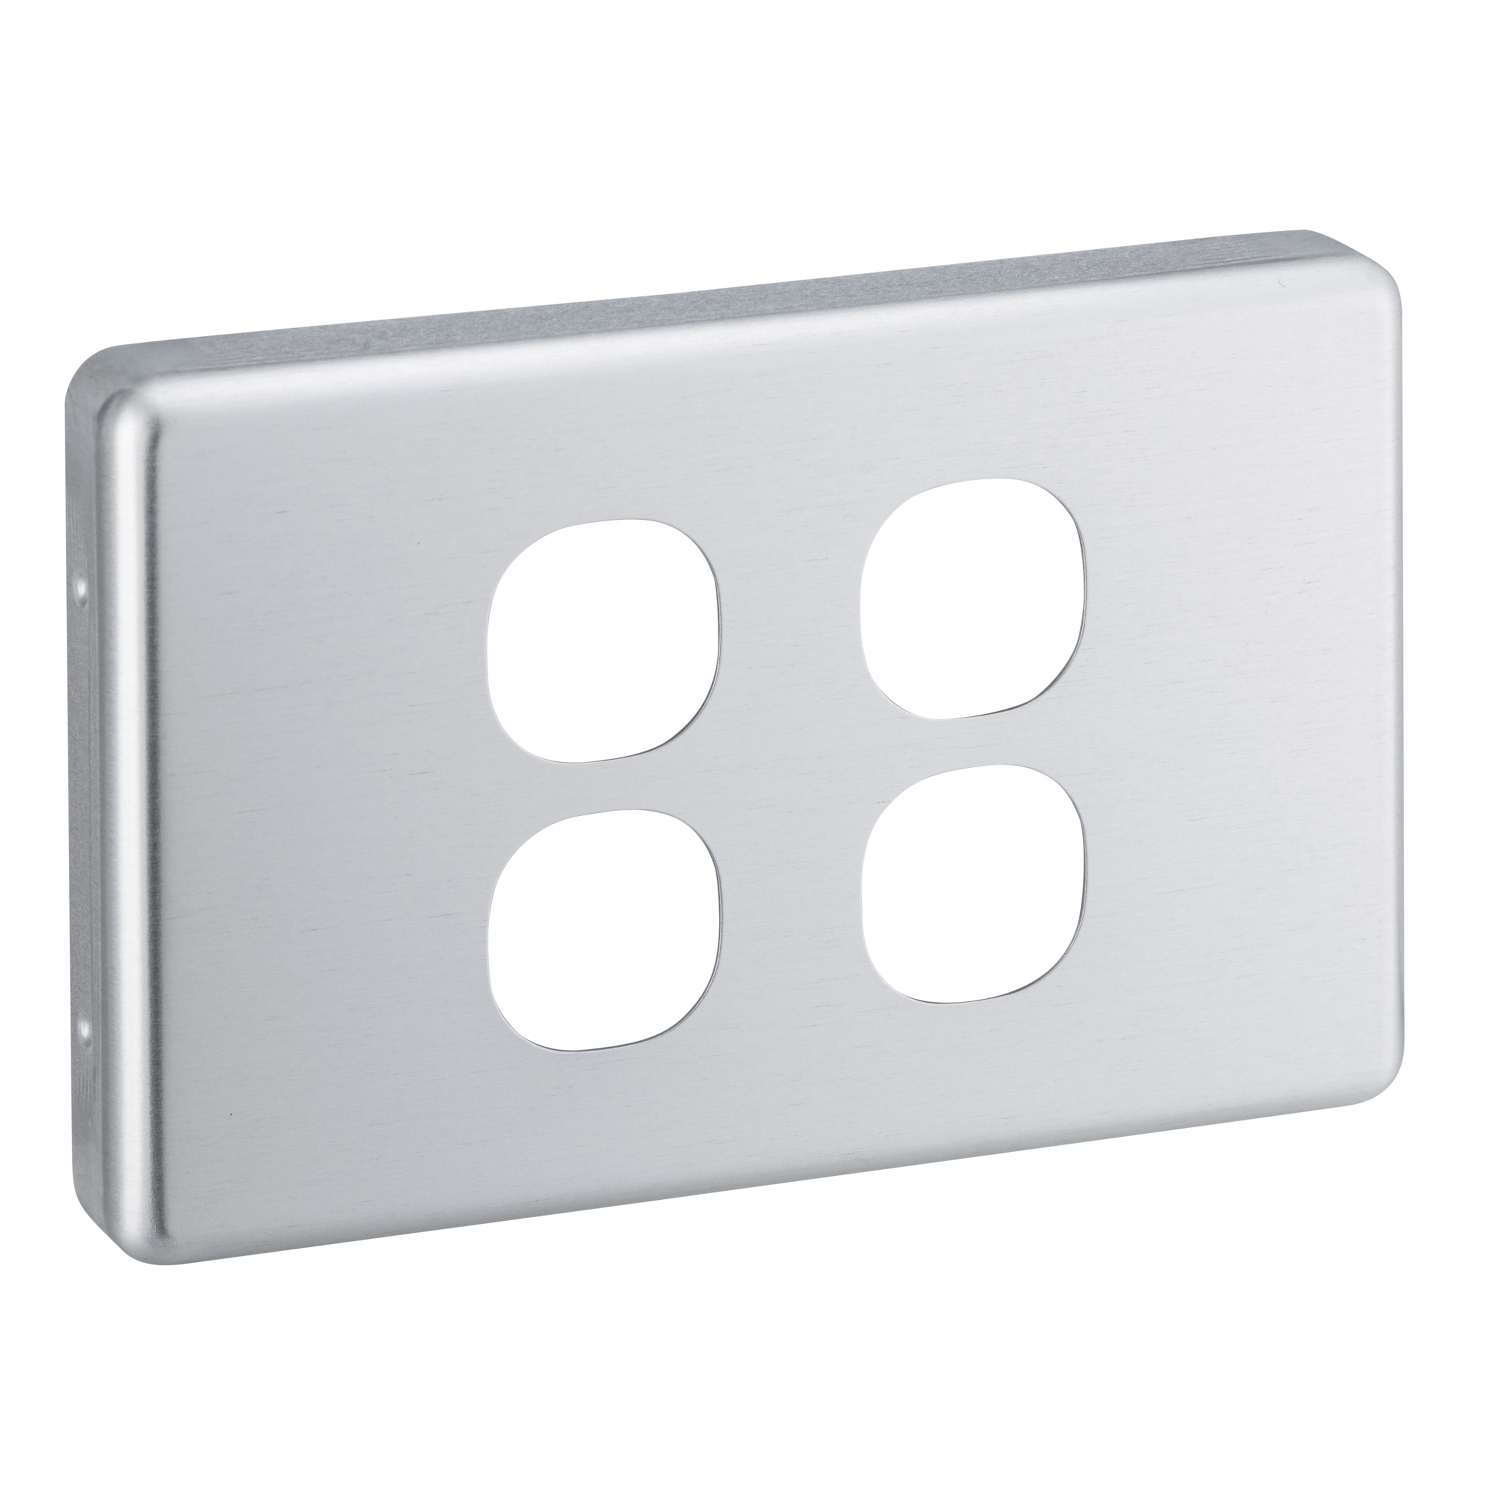 Switch Plate Covers - 4 Gang